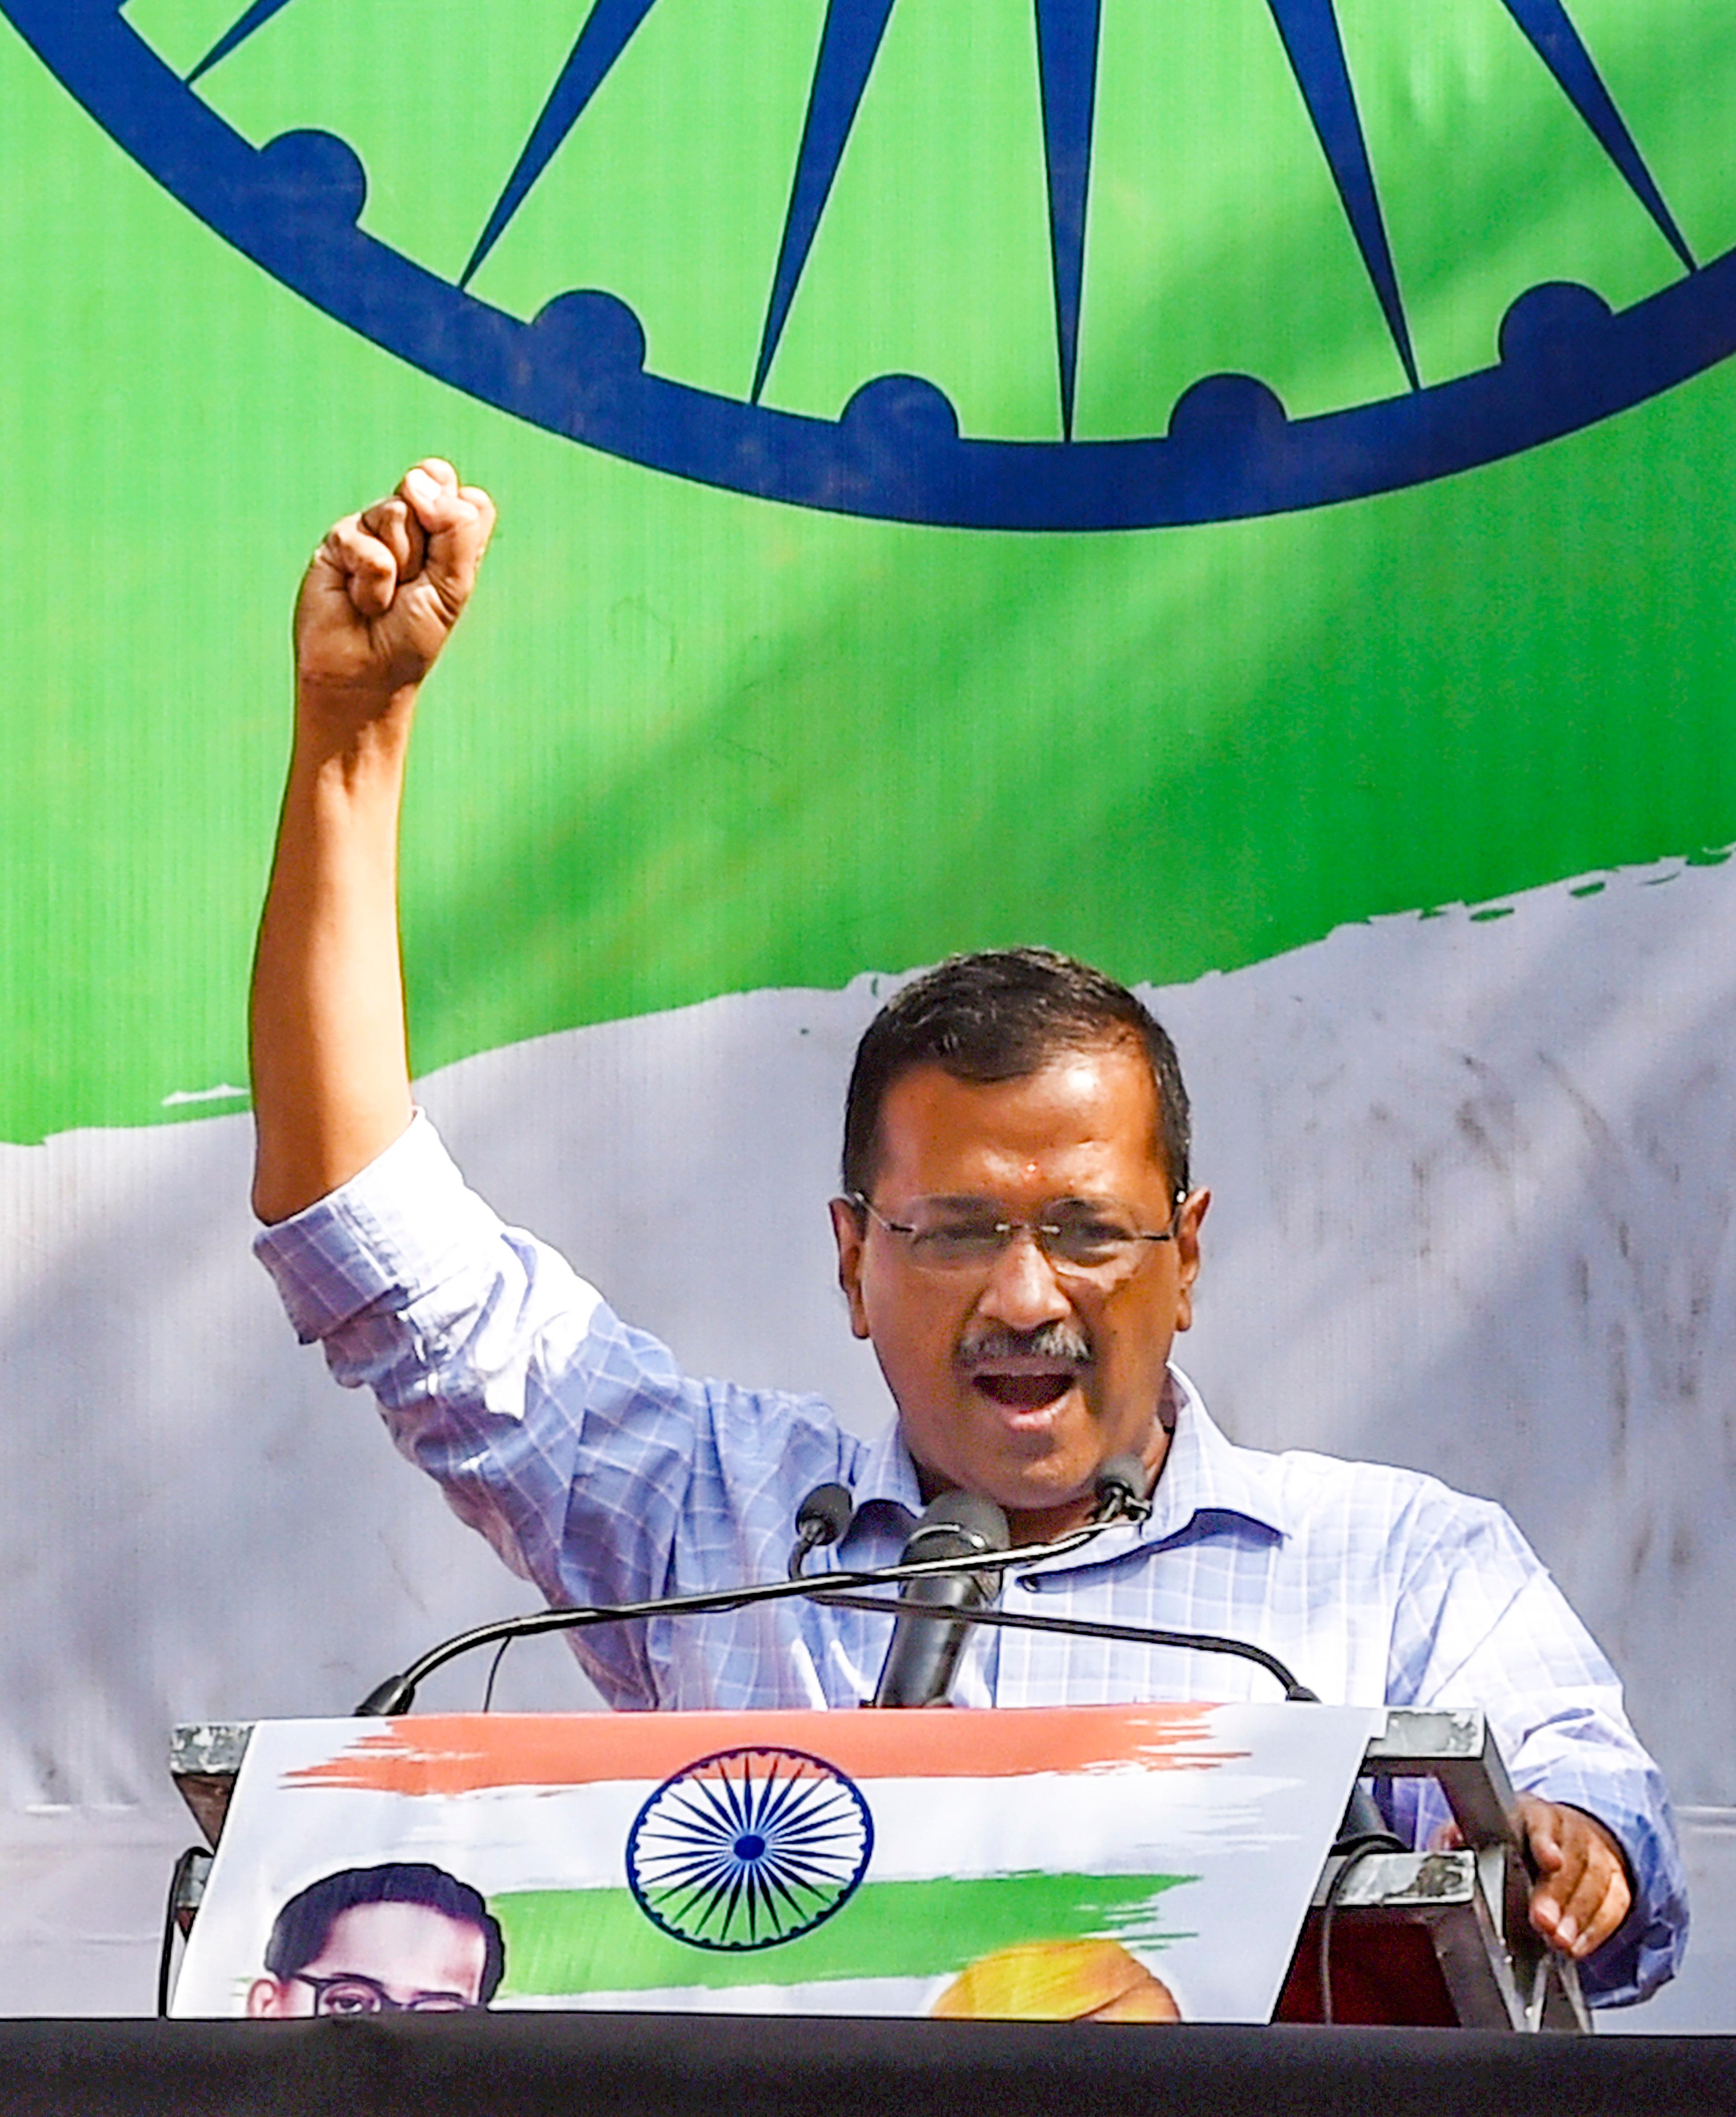 Delhi Chief Minister and Aam Aadmi Party (AAP) national convenor Arvind Kejriwal on Thursday termed the massive victory of his party in Punjab as 'Inquilab'.